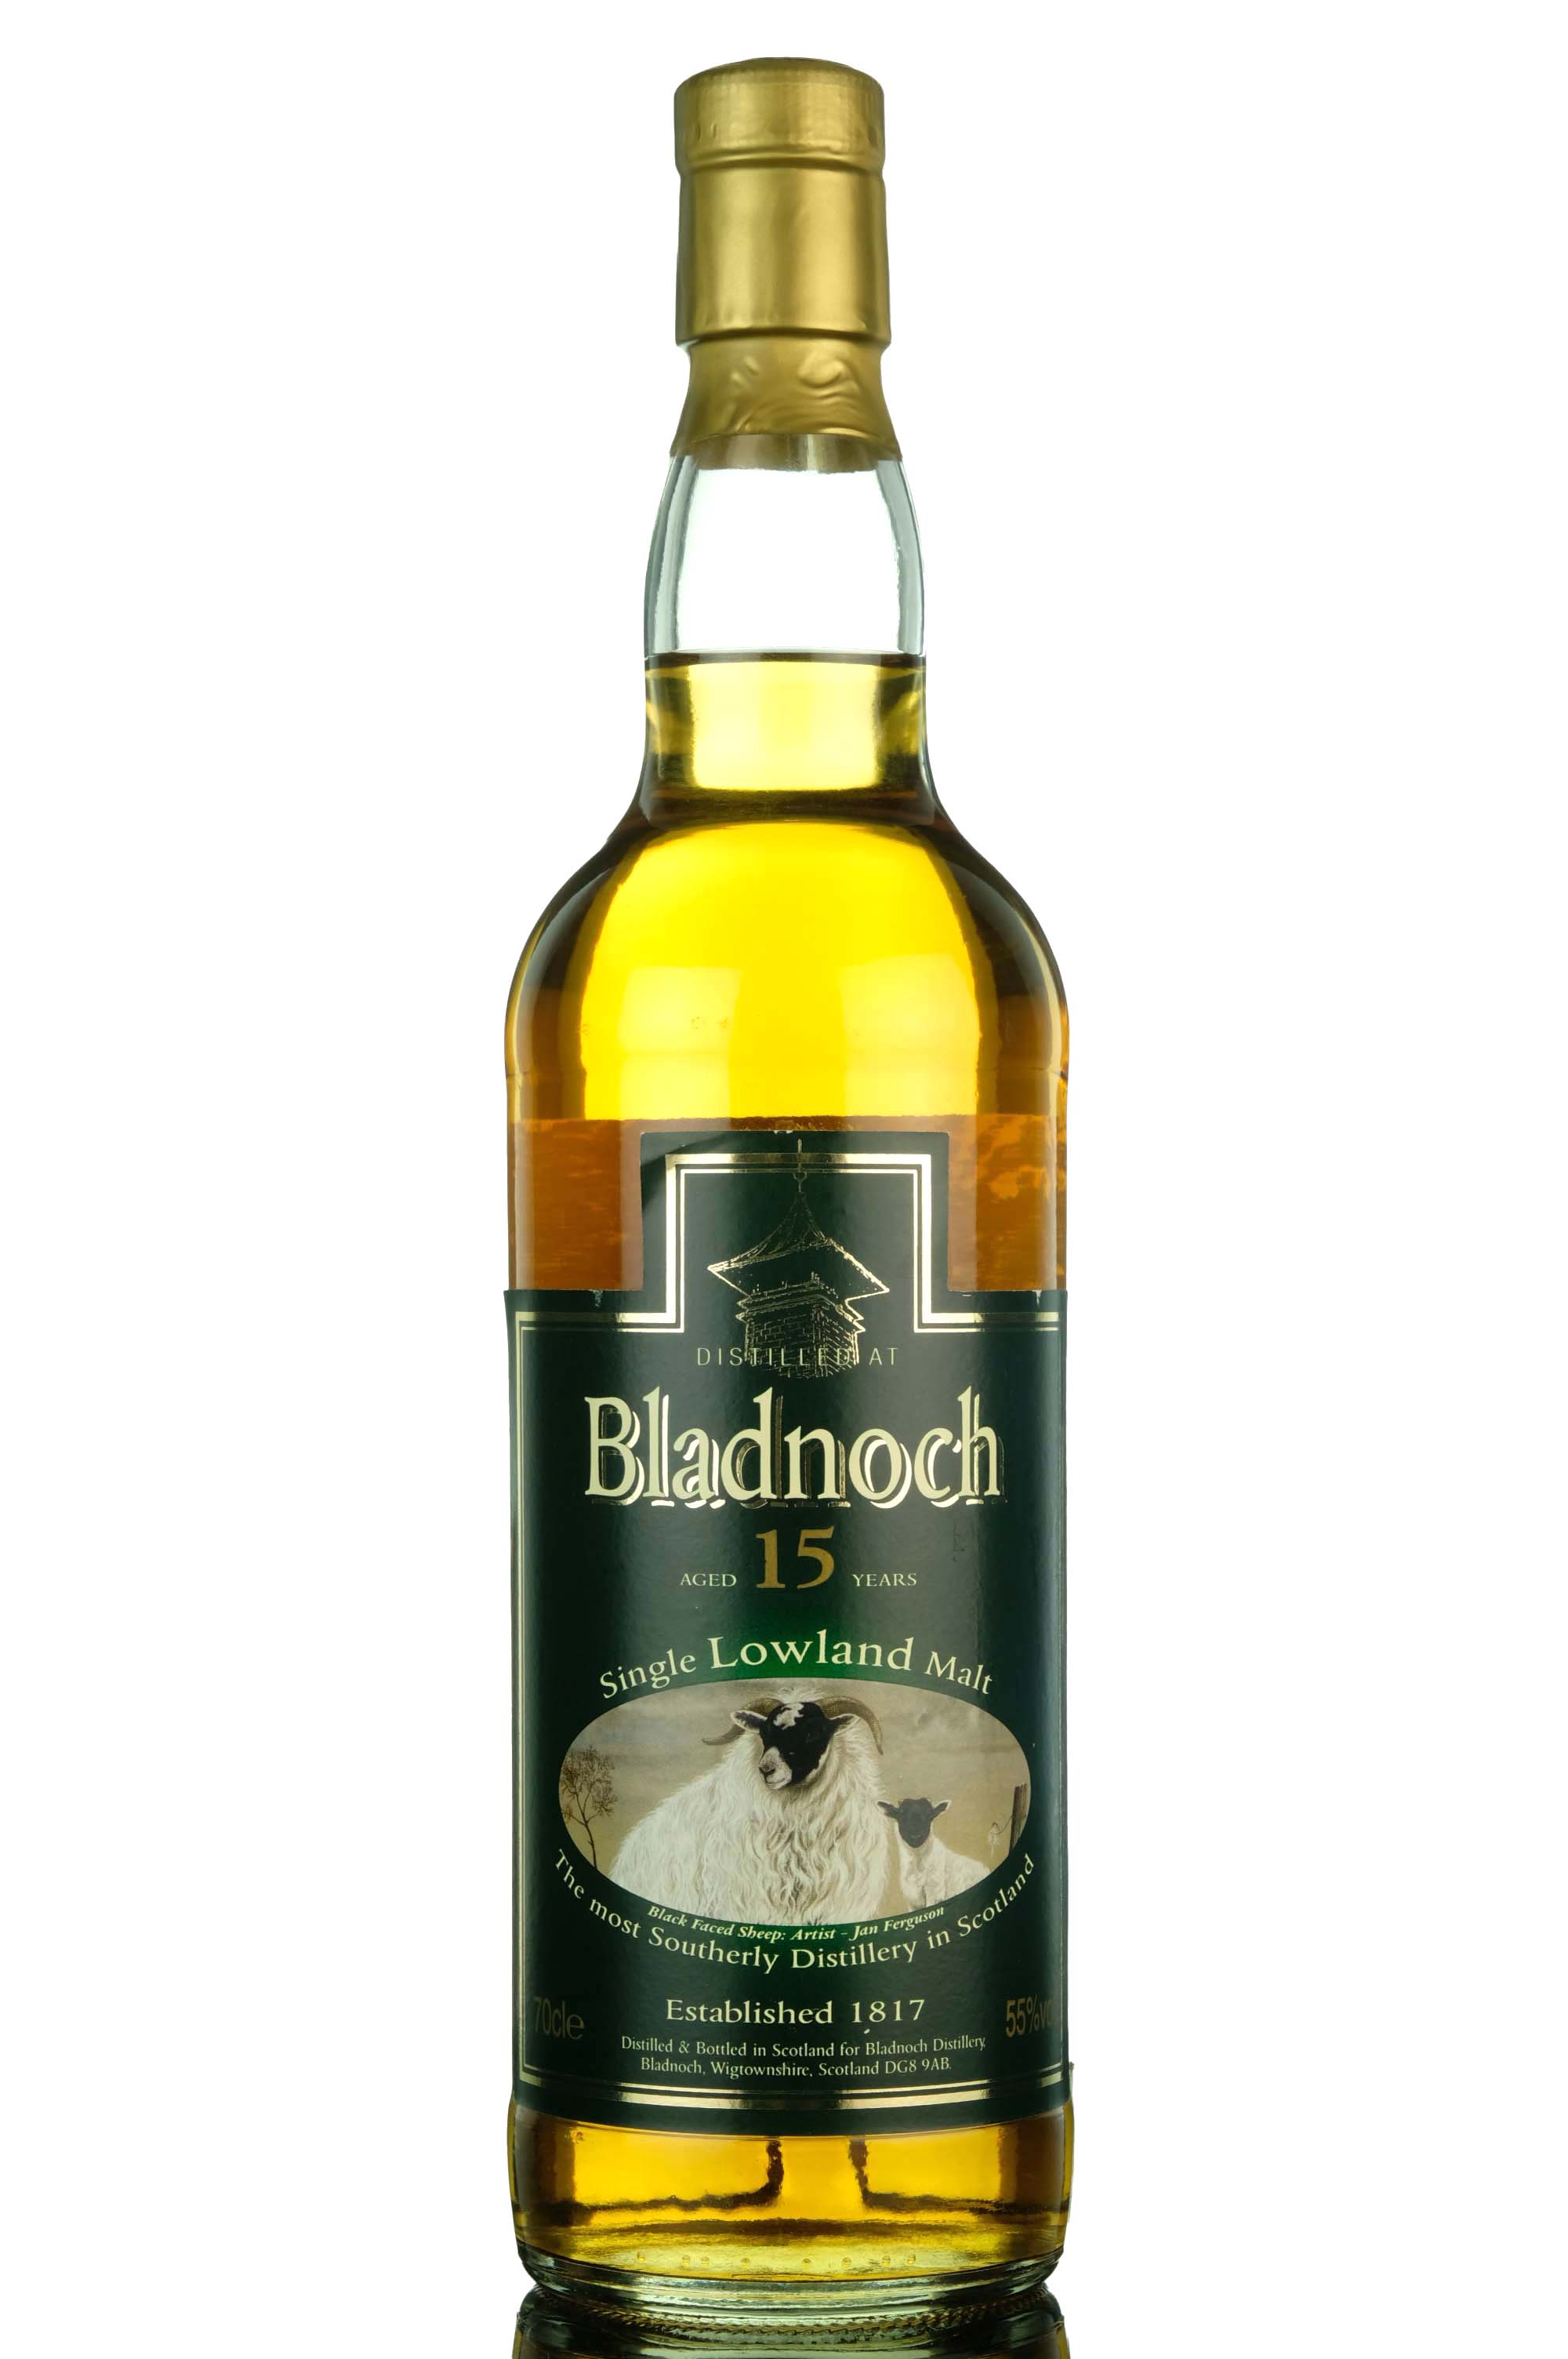 Bladnoch 15 Year Old - Early 2000s - 55%